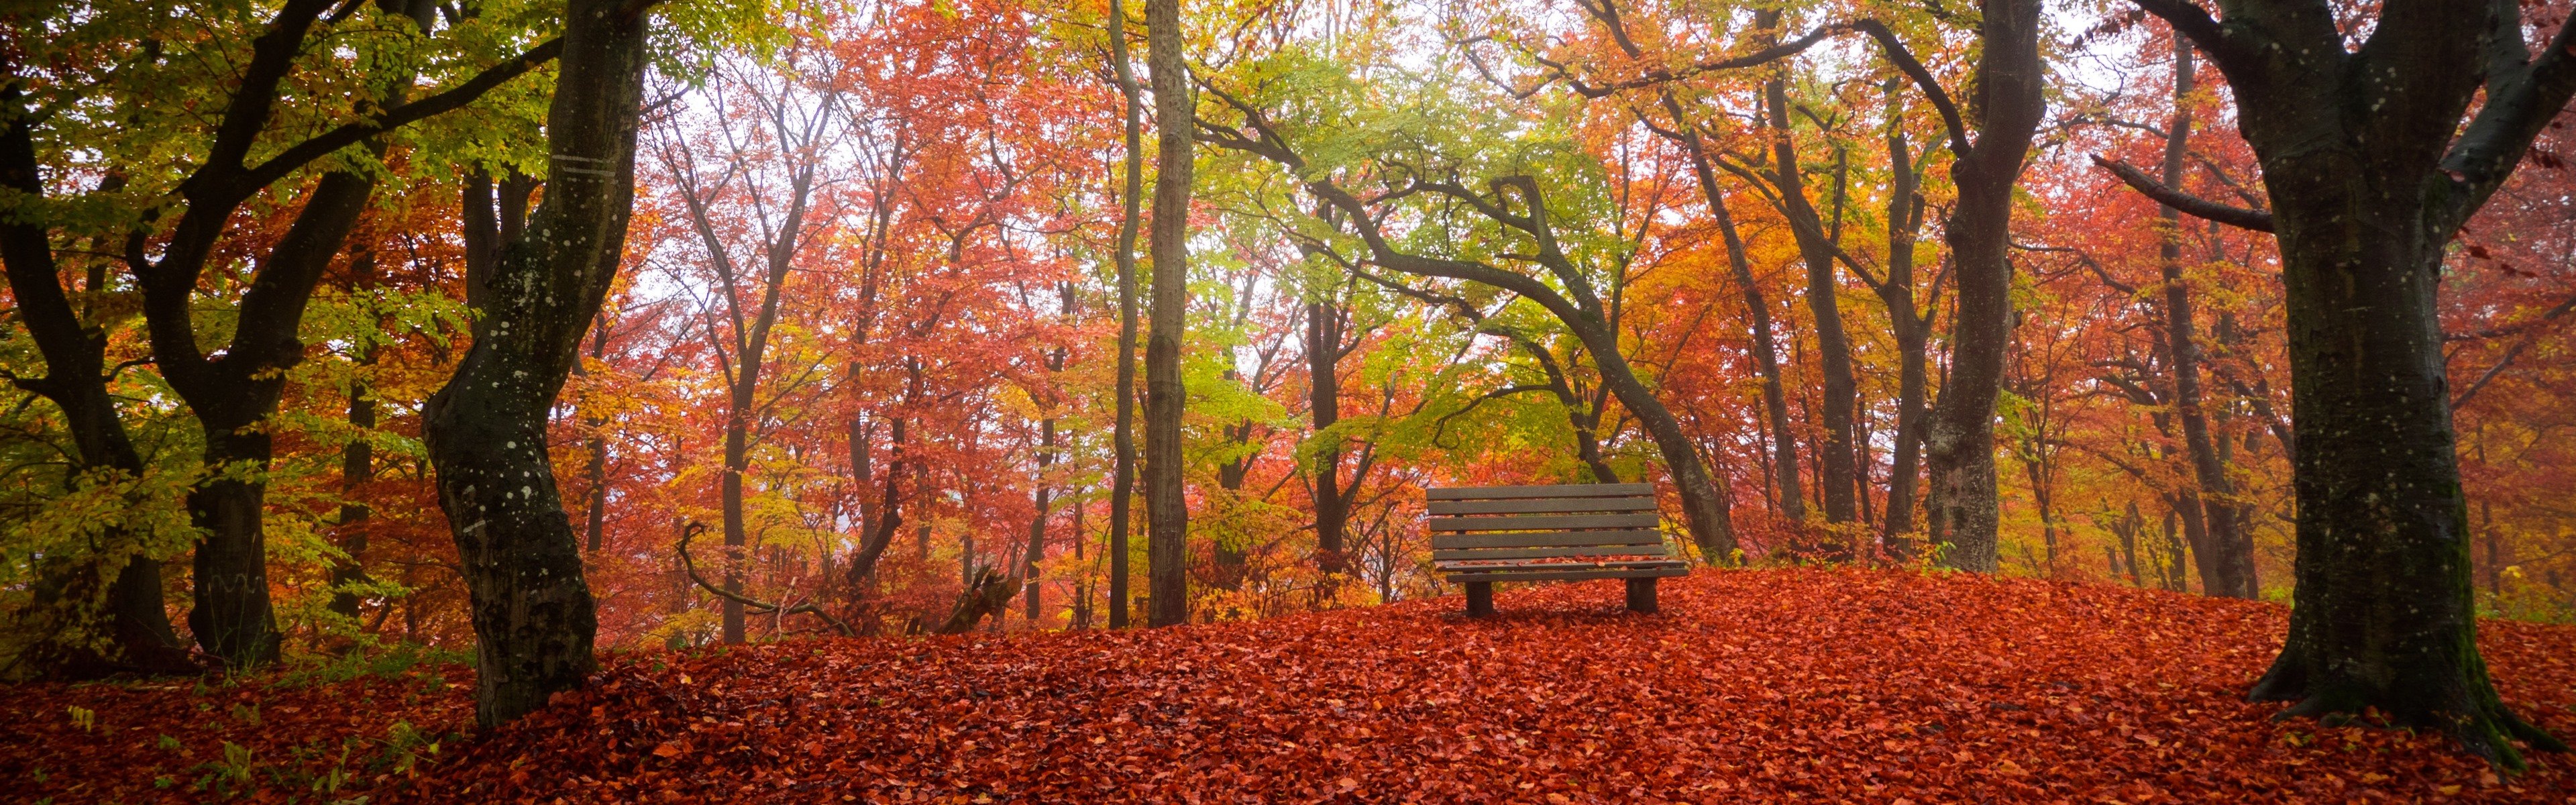 Wallpaper Autumn, trees, red leaves ground, bench, park 3840x2160 UHD 4K Picture, Image